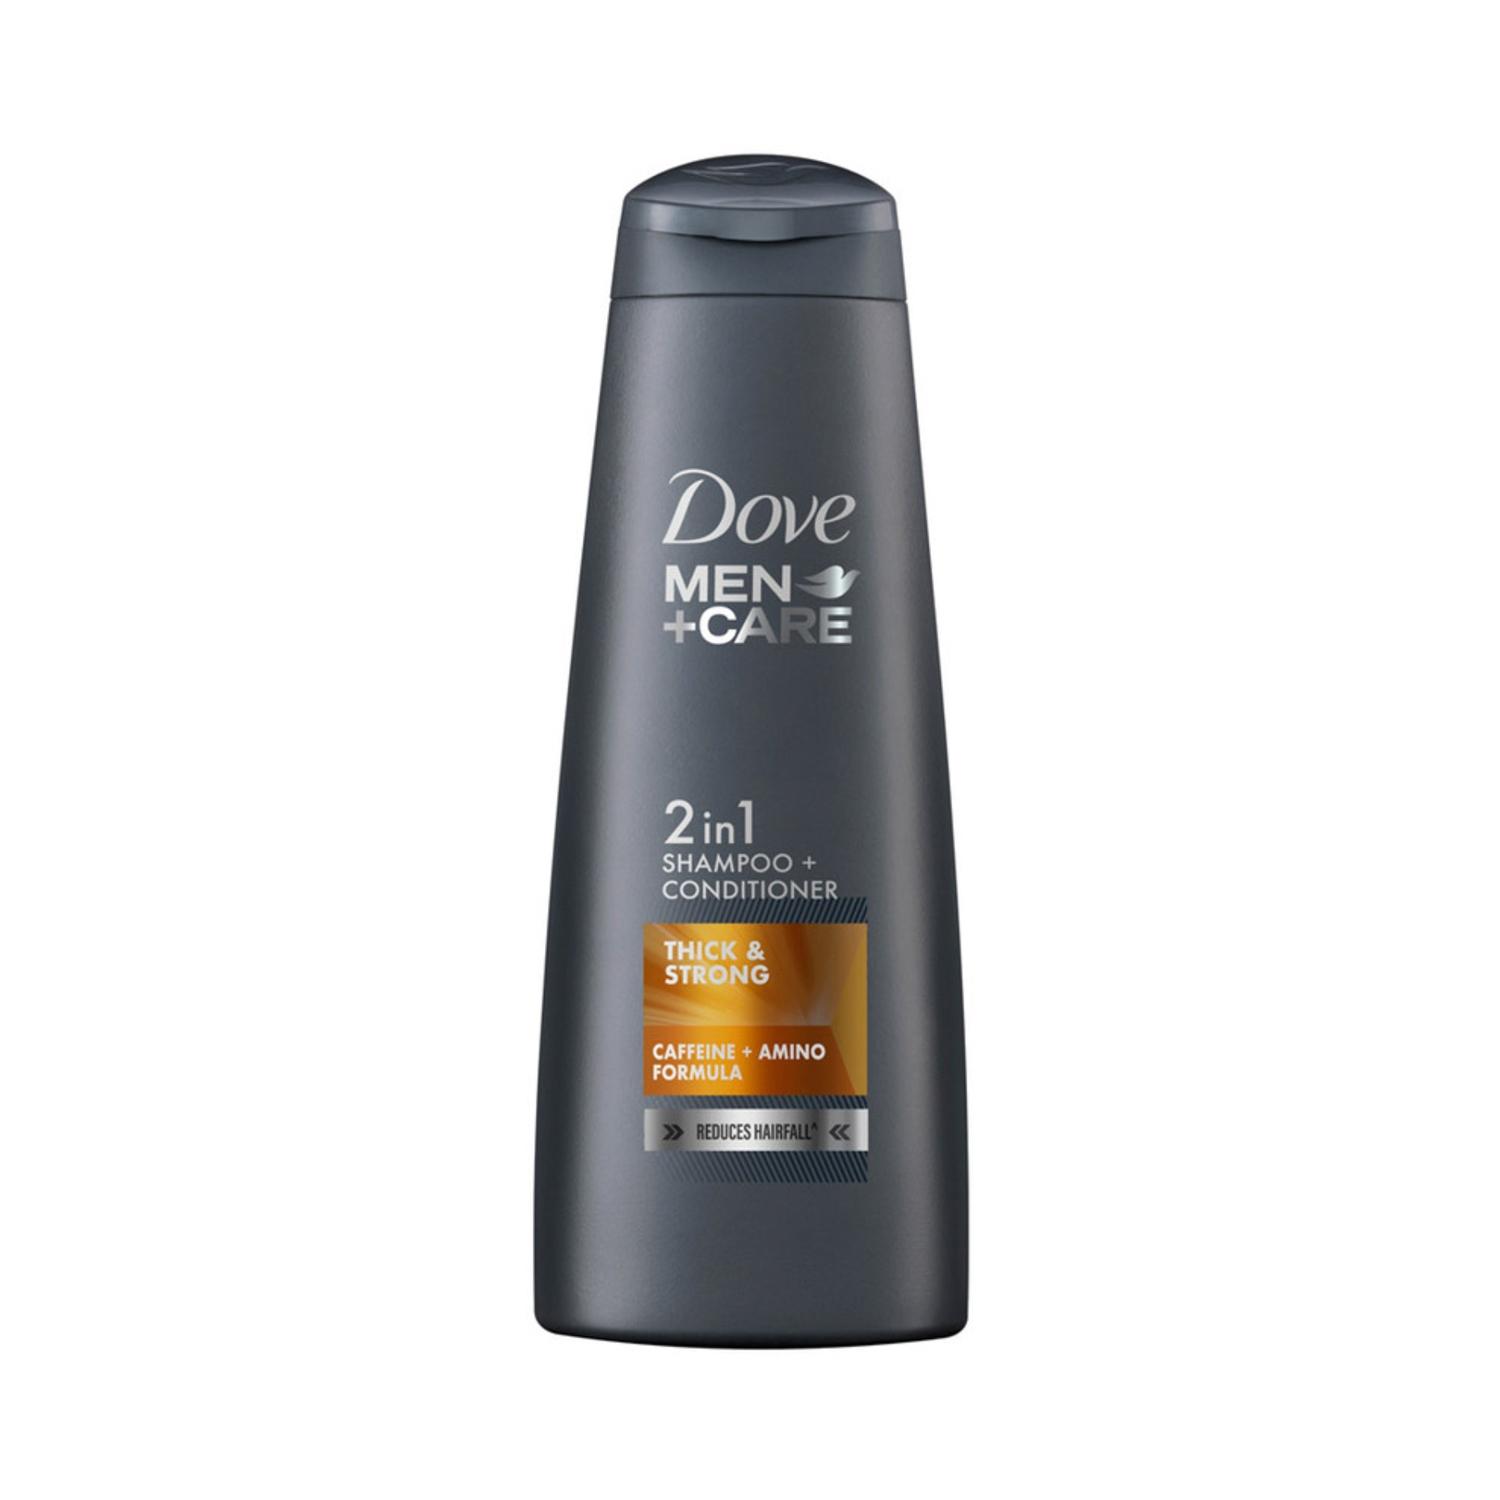 dove men+care thick & strong 2 in 1 shampoo + conditioner (340ml)